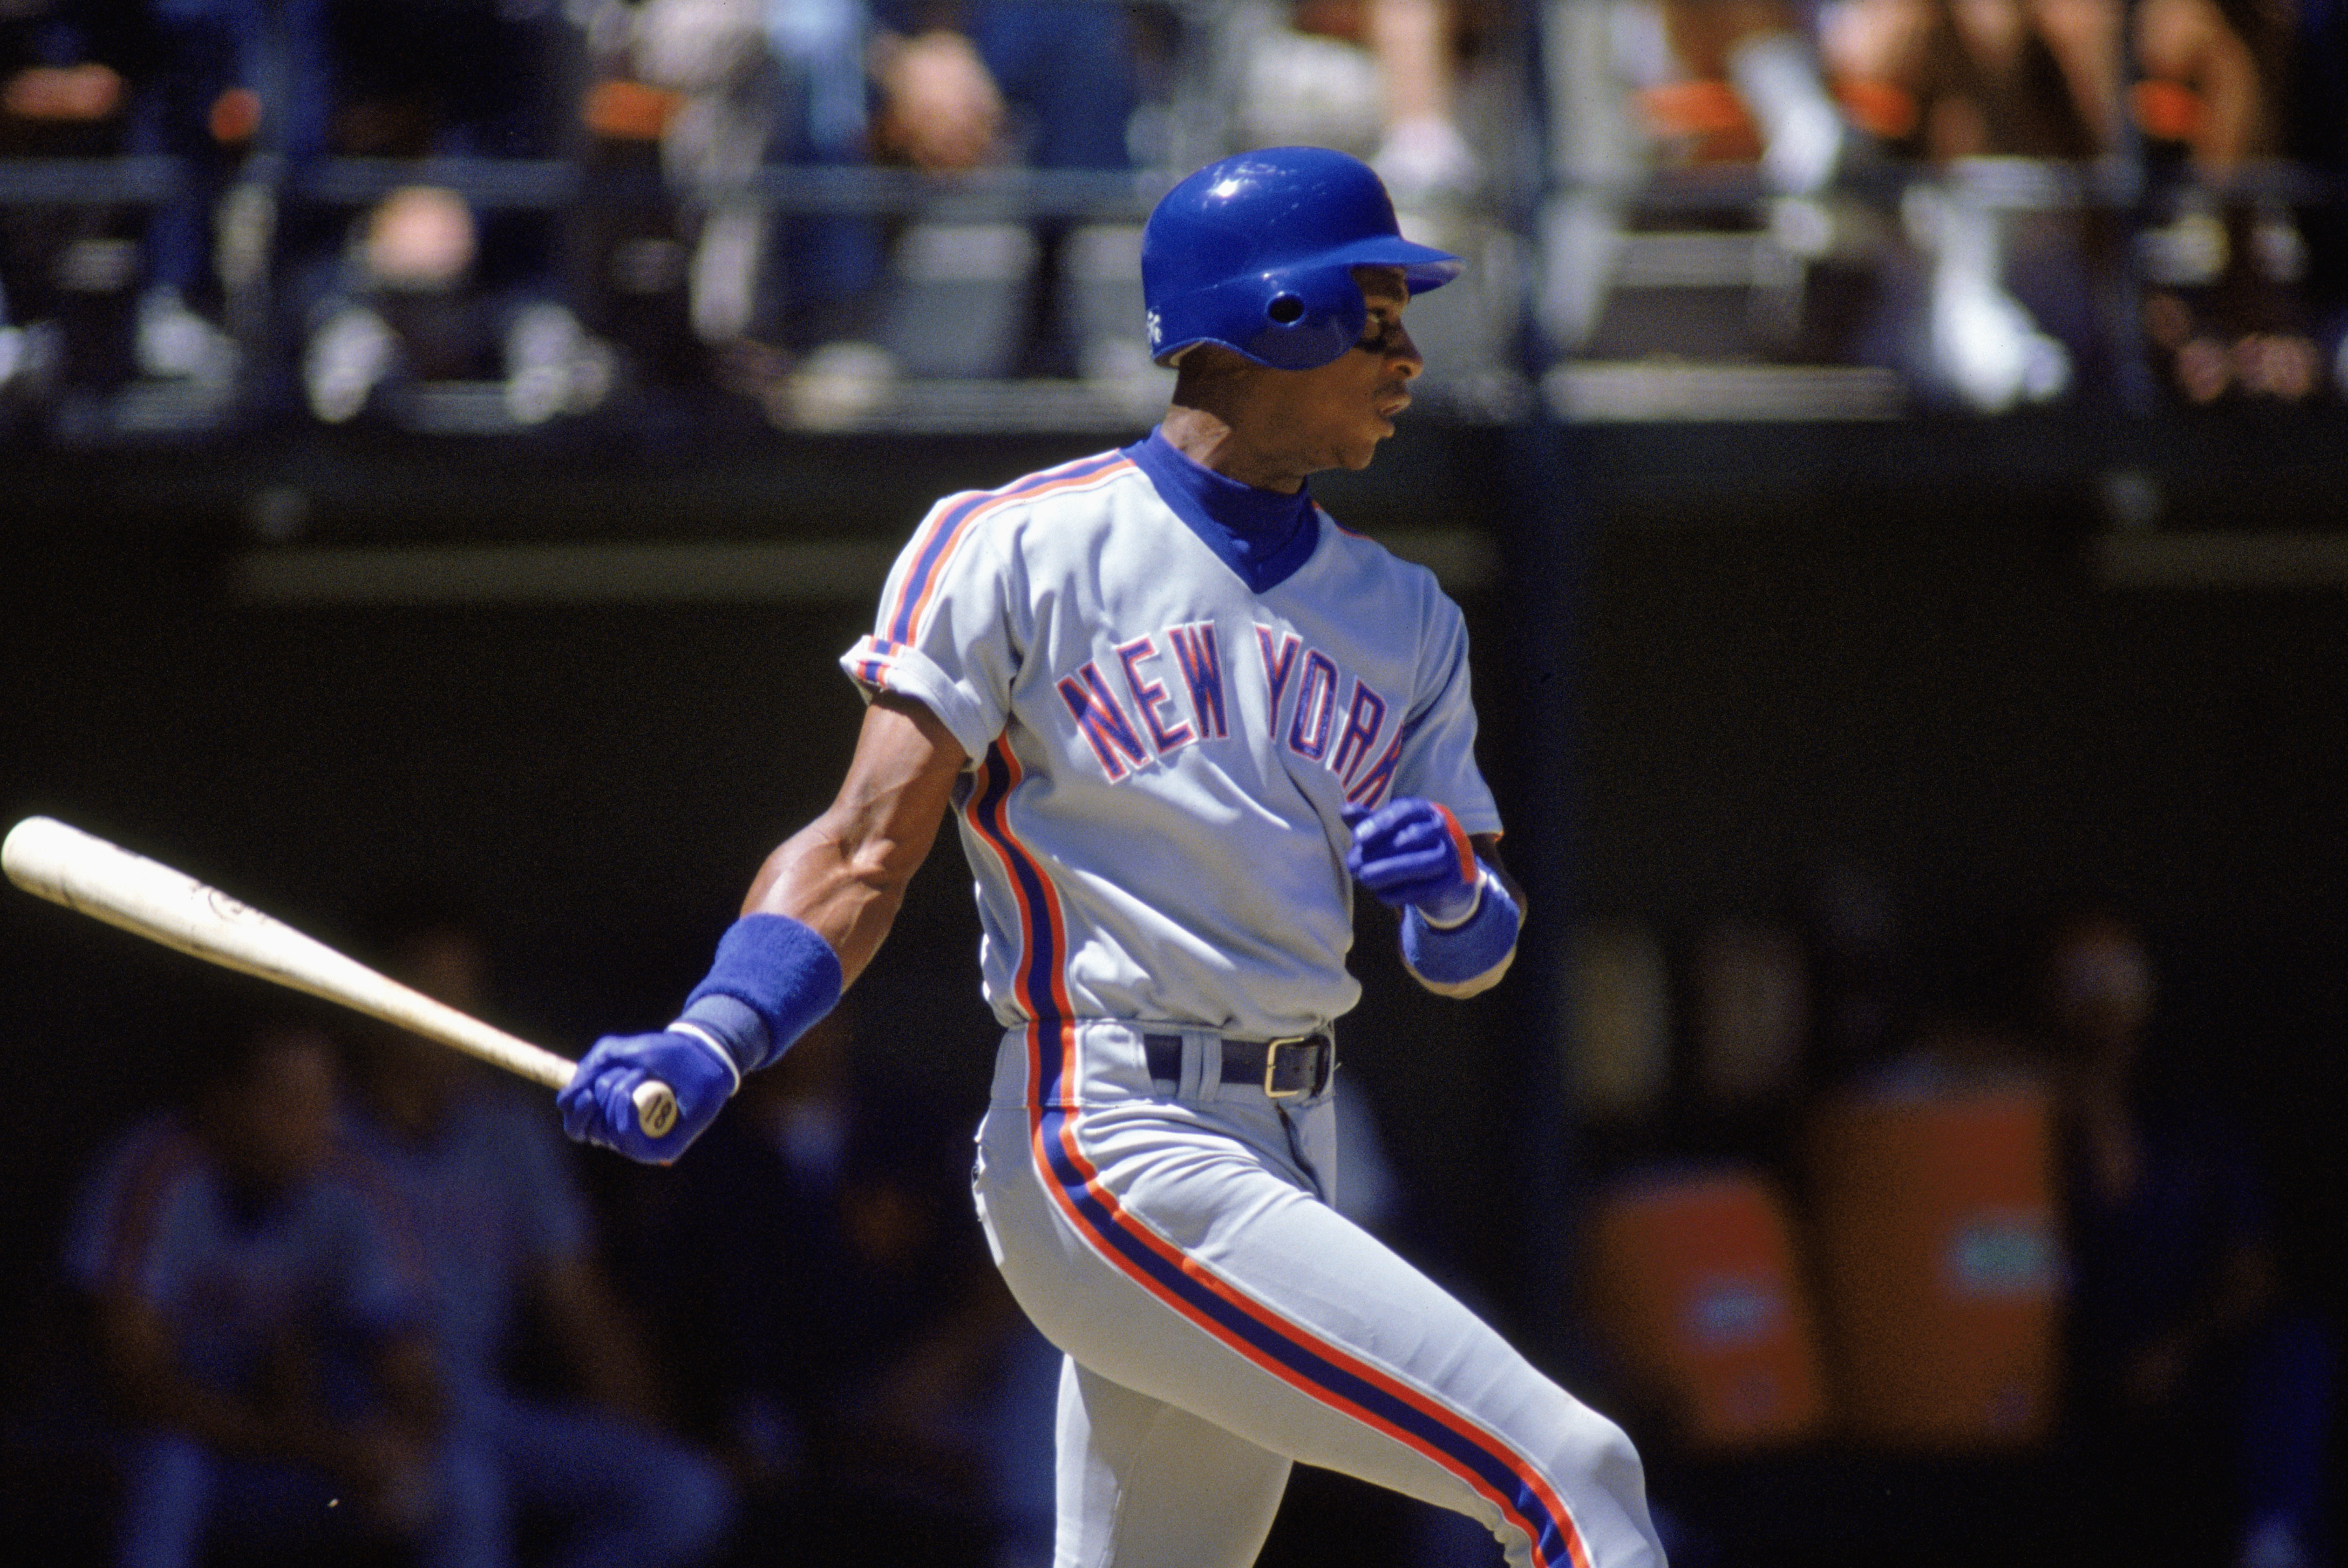 Darryl Strawberry opens up about having sex during games